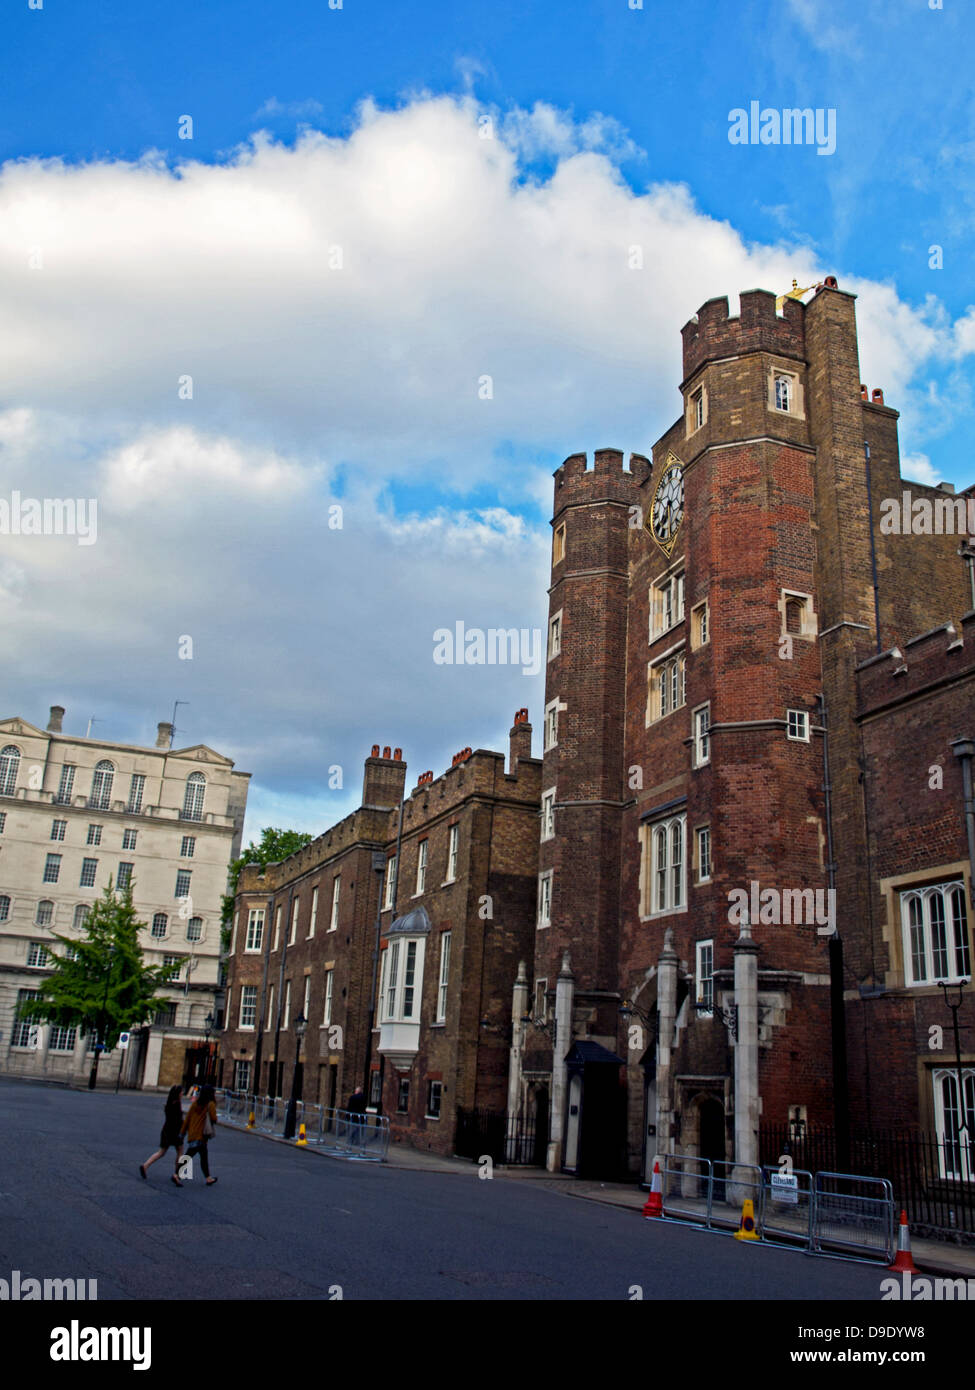 St. James's Palace one of London's oldest palaces,Pall Mall,north of St James's Park, City of Westminster, London, England, UK Stock Photo